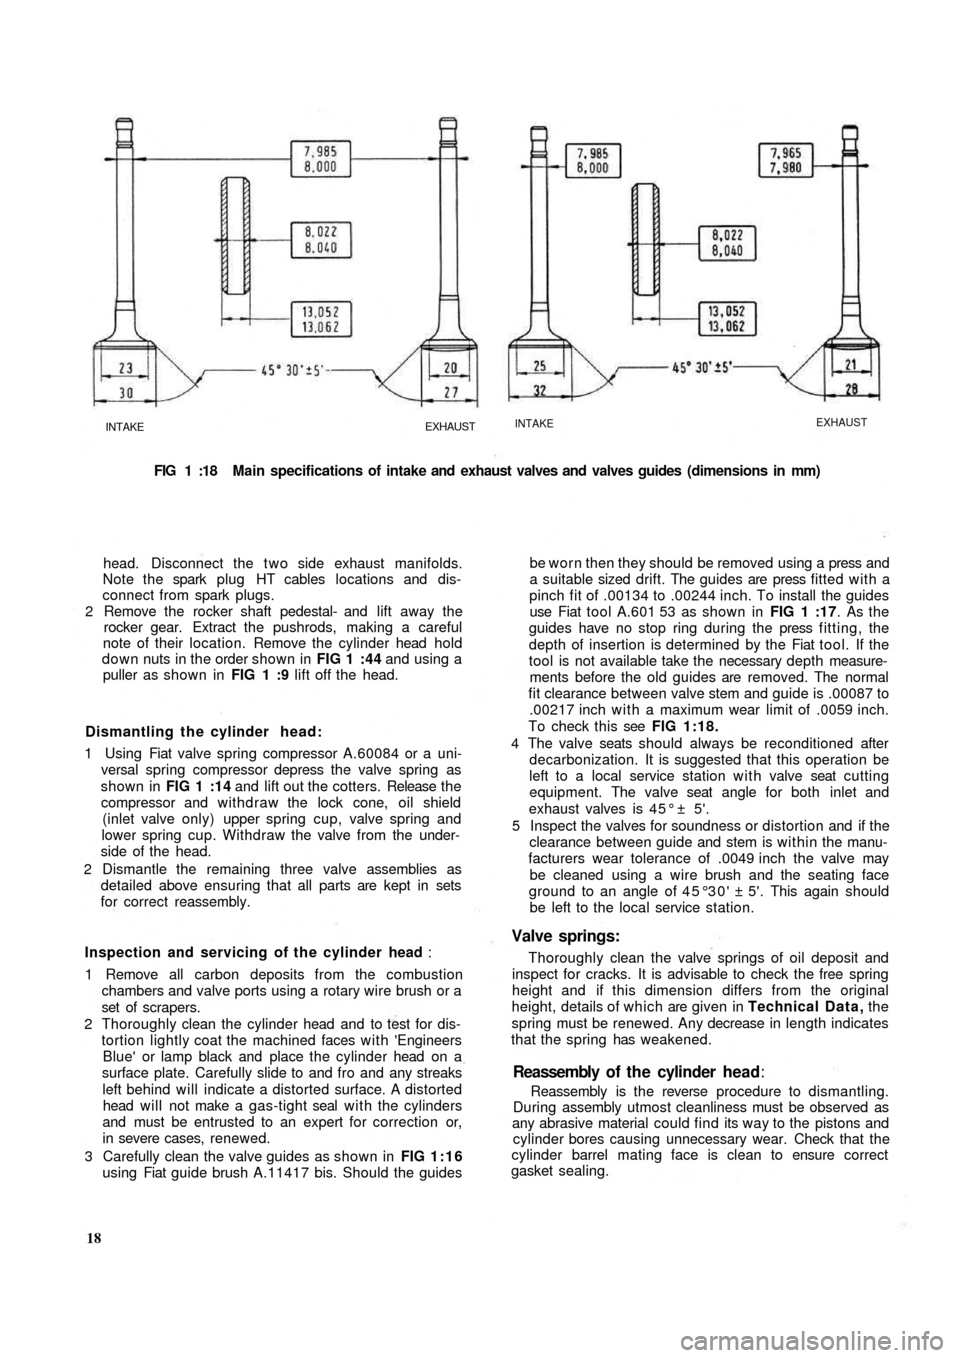 FIAT 500 1969 1.G Workshop Manual INTAKEEXHAUSTINTAKEEXHAUST
FIG 1 :18  Main specifications of intake and exhaust valves and valves guides (dimensions in  mm)
head. Disconnect the t w o side exhaust manifolds.
Note the spark  plug  HT